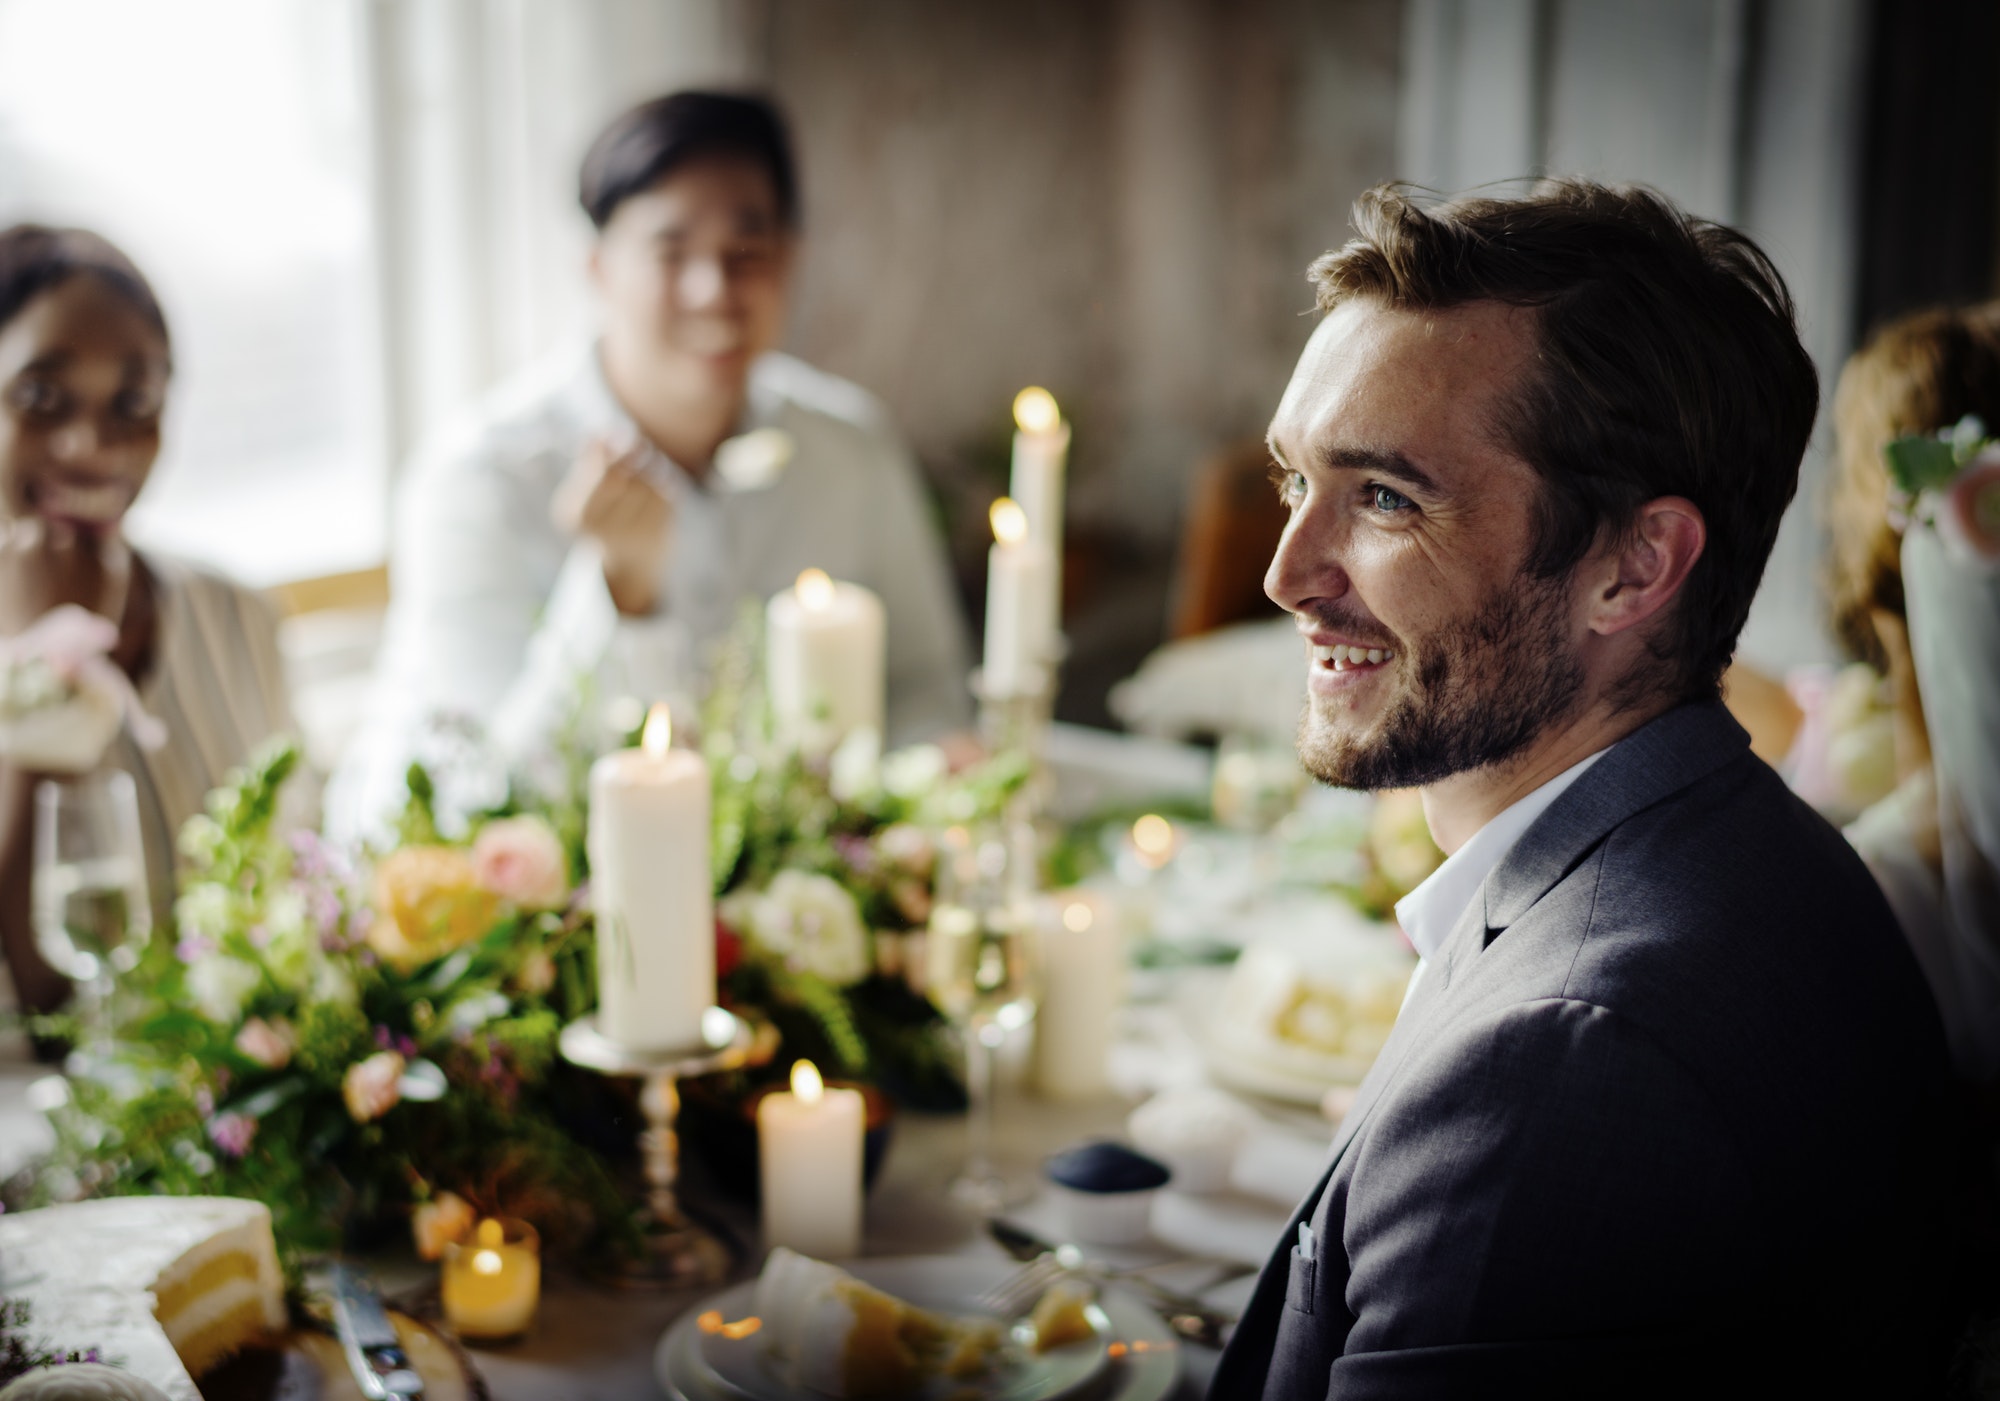 Man smiling at a formal dinner event with guests and candles on the table.